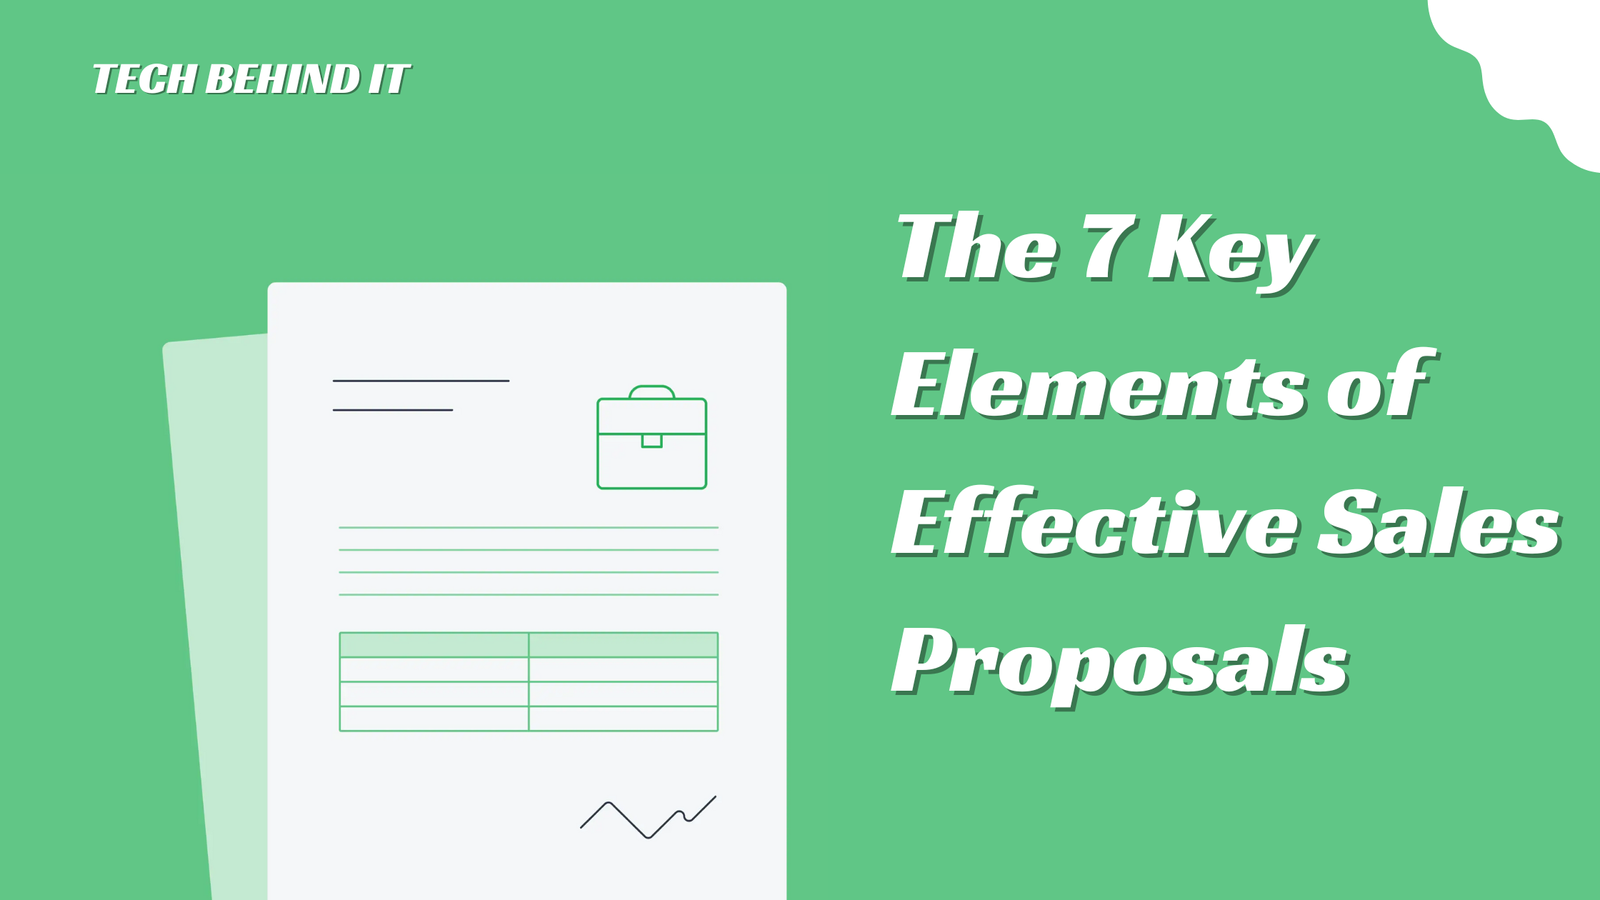 The 7 Key Elements of Effective Sales Proposals